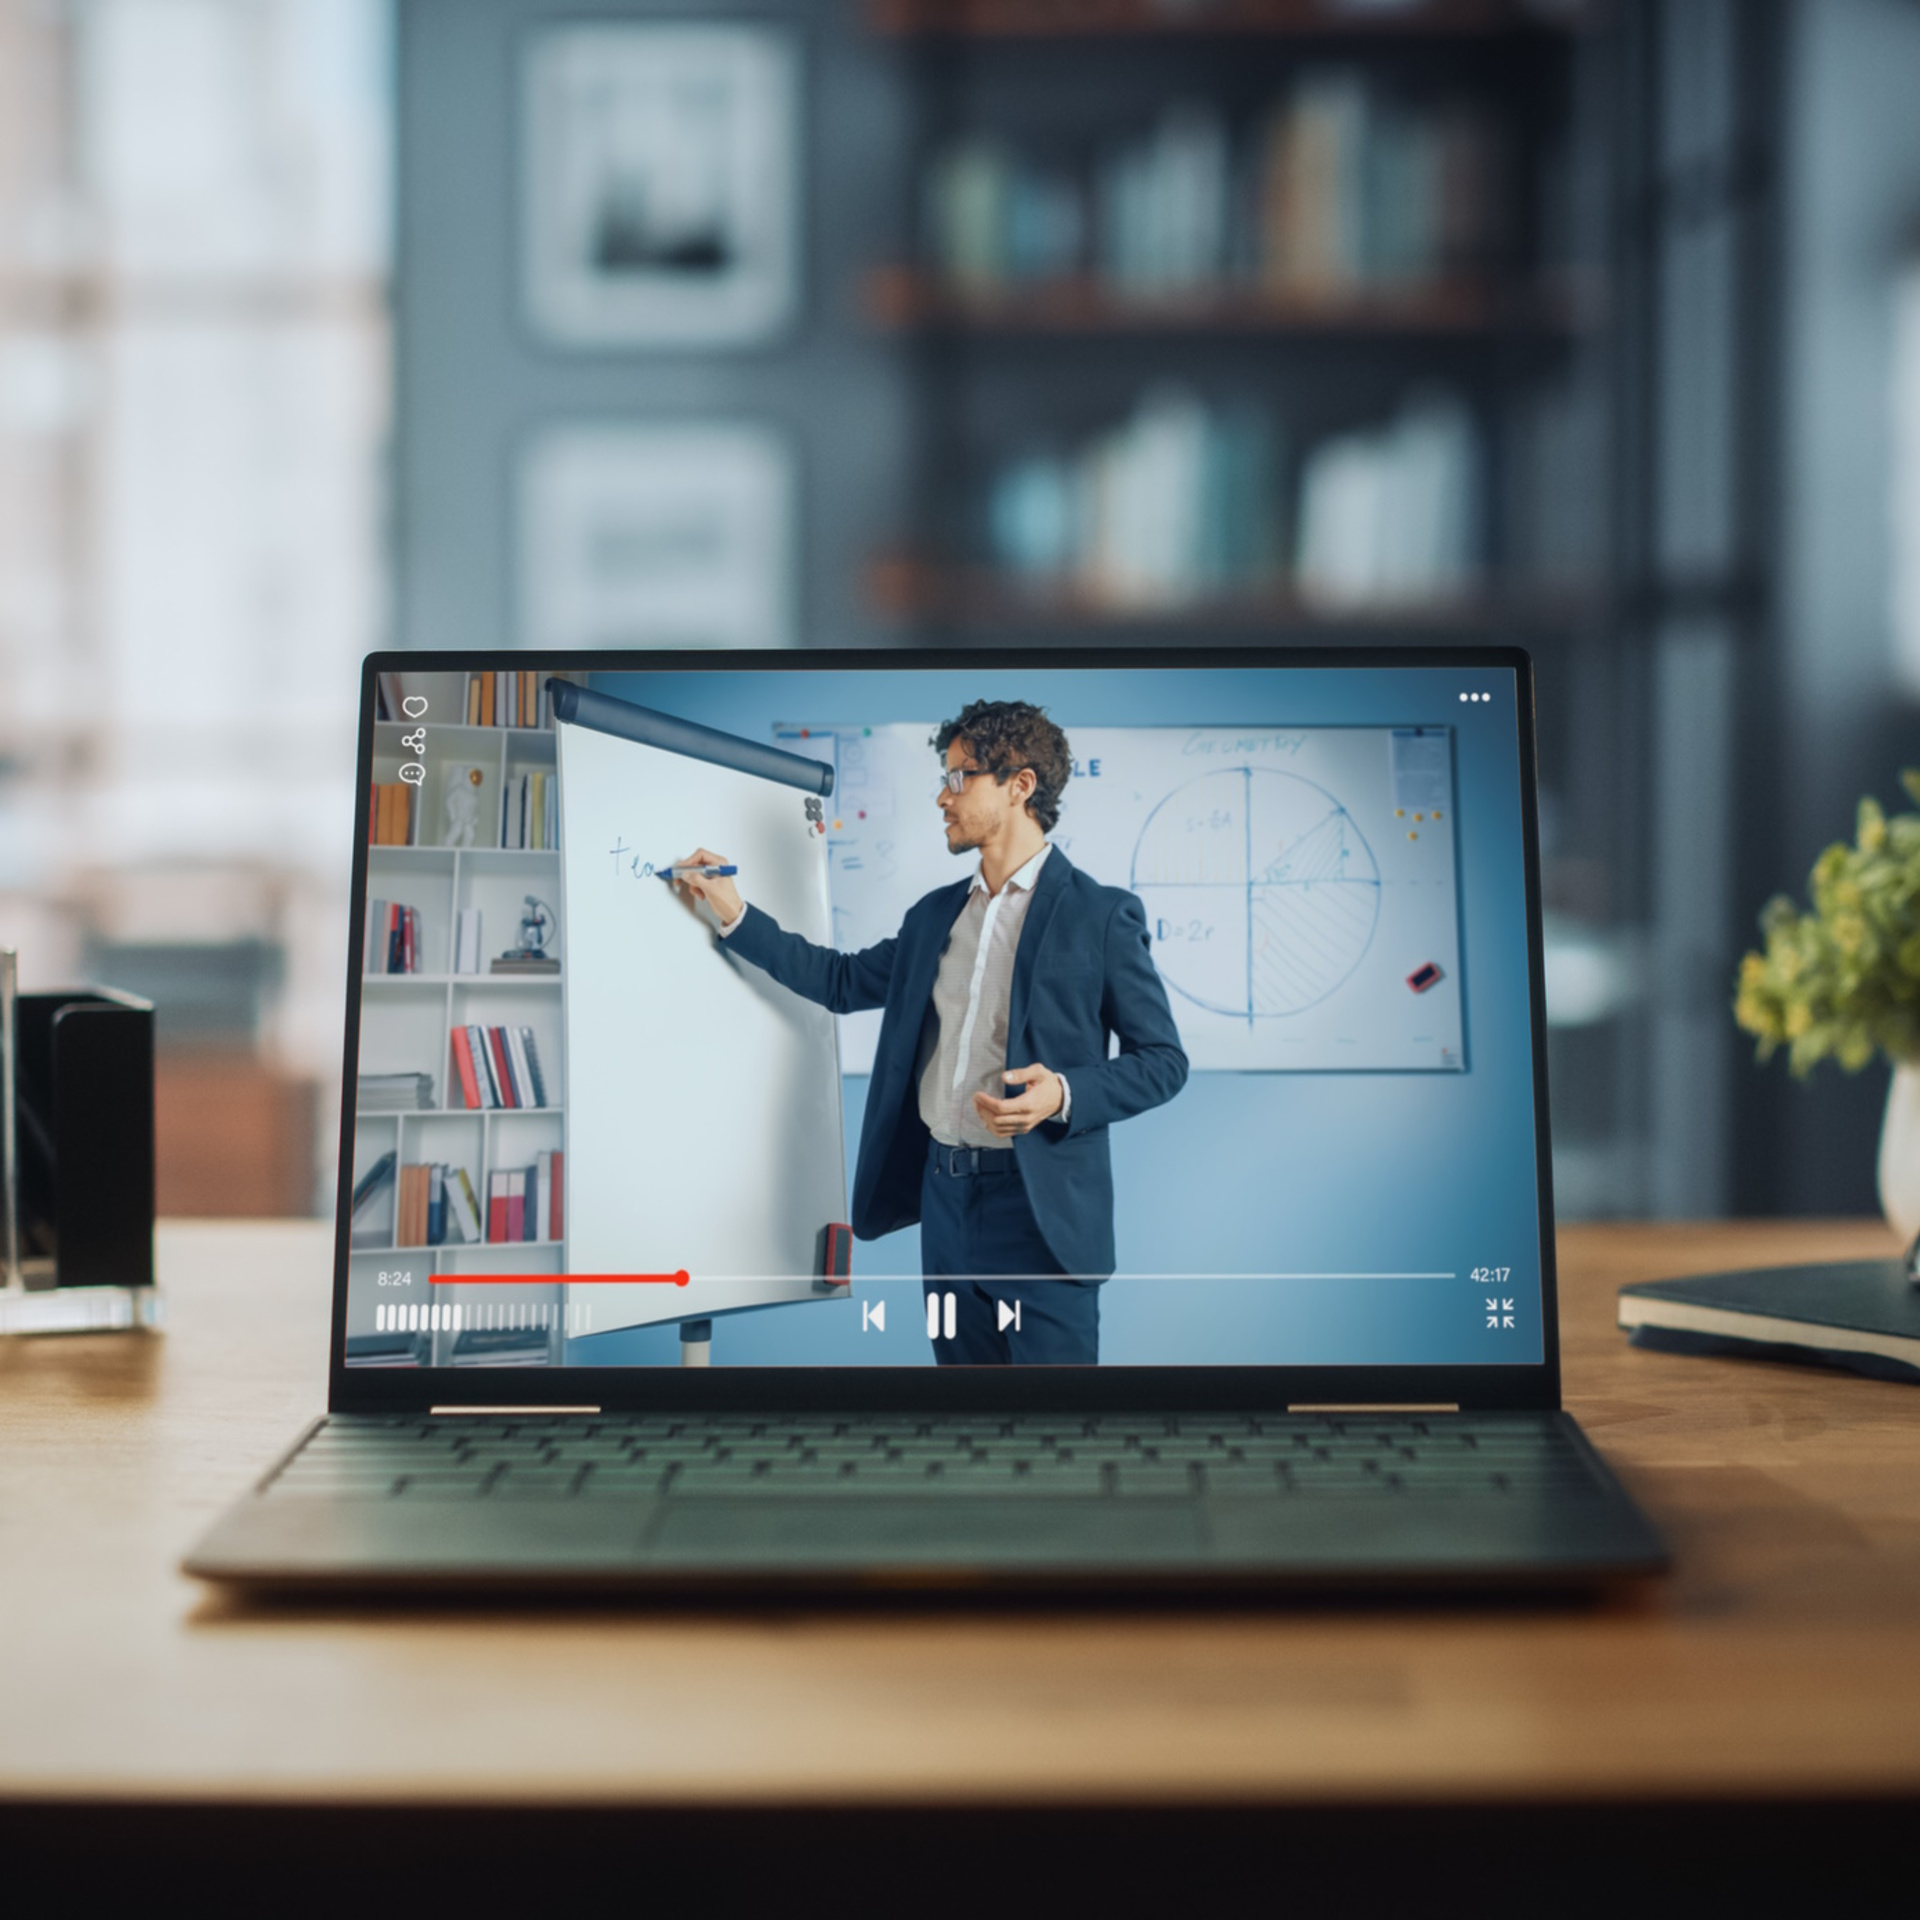 Shot of a Laptop Computer Showing Online Lecture with Portrait of a Cute Male Teacher Explaining Math Formulas. It is Standing on the Wooden Desk in Stylish Modern Home Office Studio During Day.